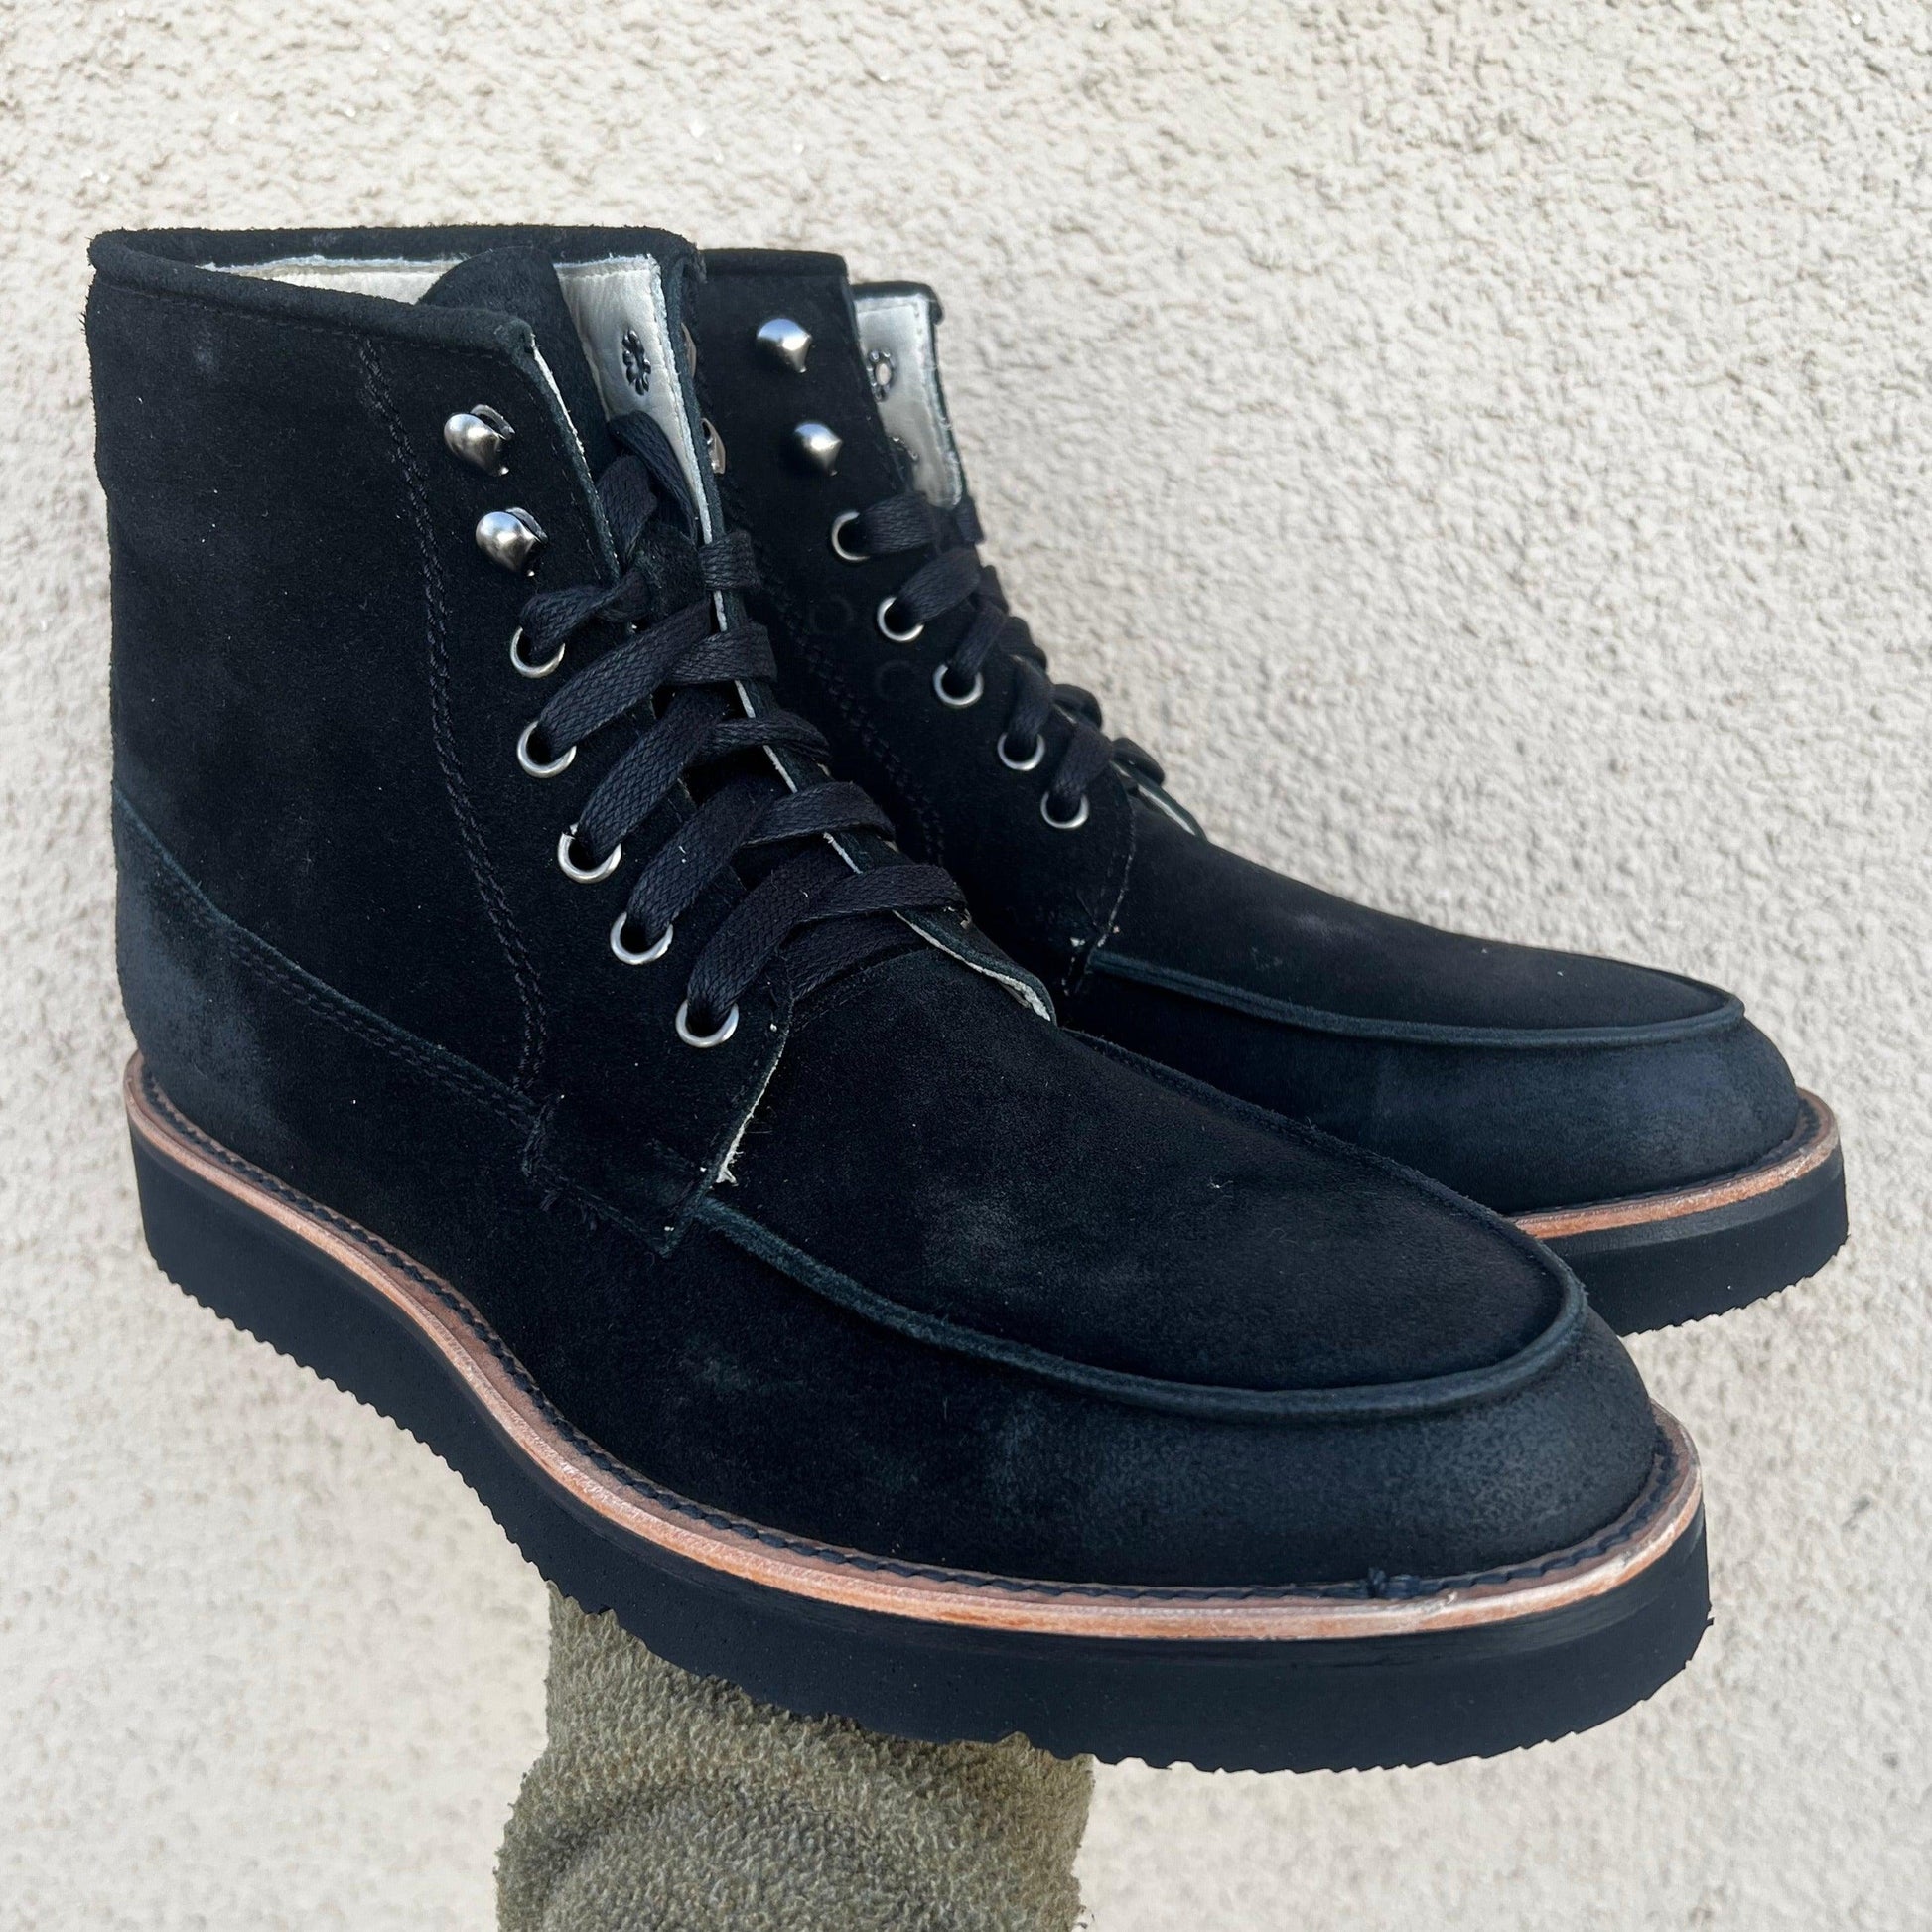 Waxed Suede Midnight Nomad Size 8 Item #0775 - DIEVIER